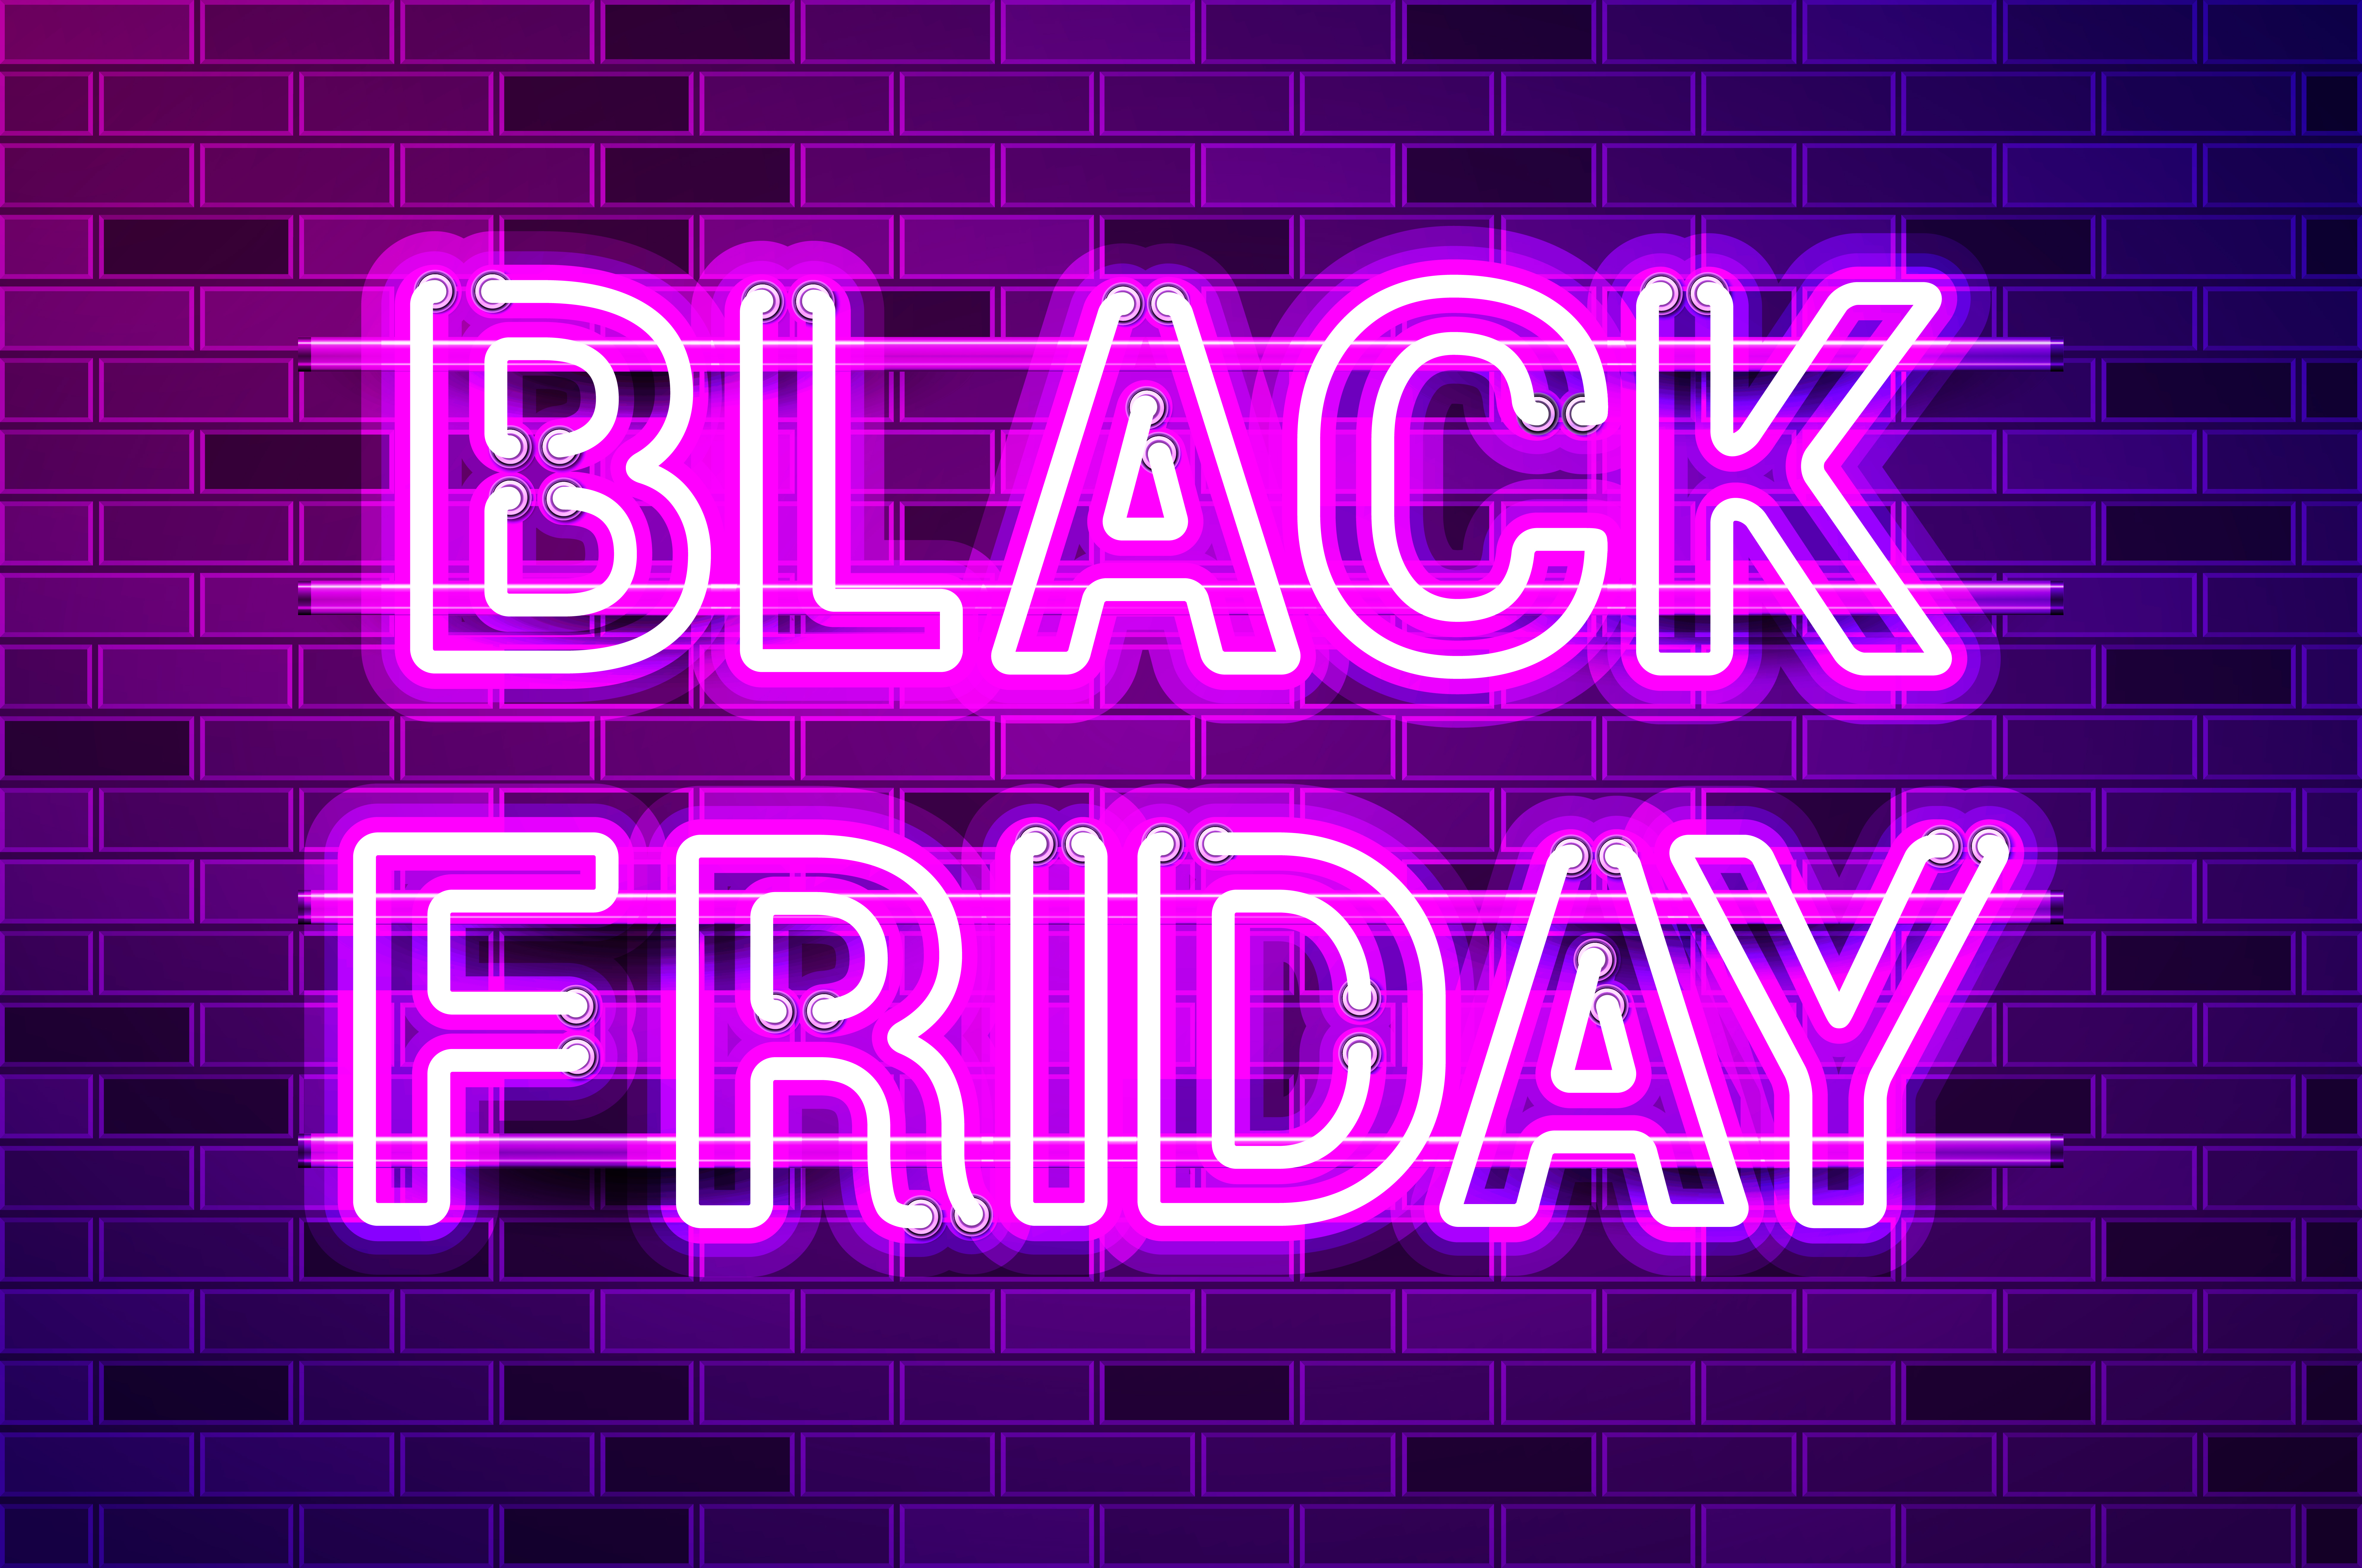 BLACK FRIDAY lettering glowing neon lamp sign. Realistic vector illustration. Purple brick wall, violet glow, metal holders.. BLACK FRIDAY lettering glowing purple neon lamp sign